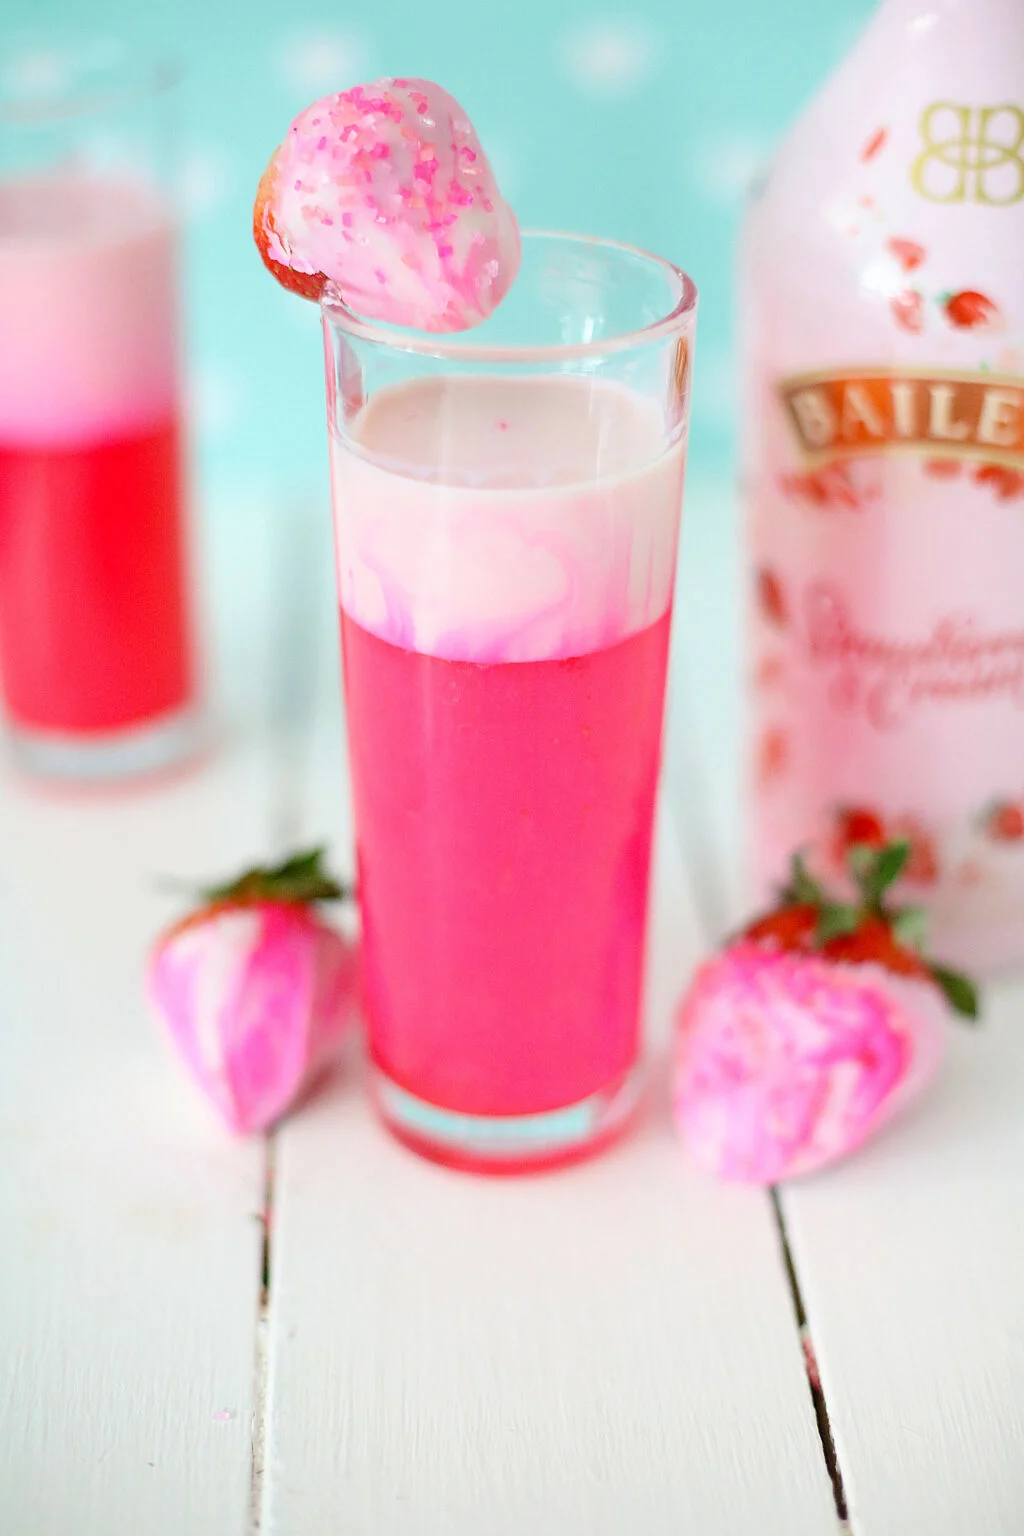 shimmery pink drink in shot glass